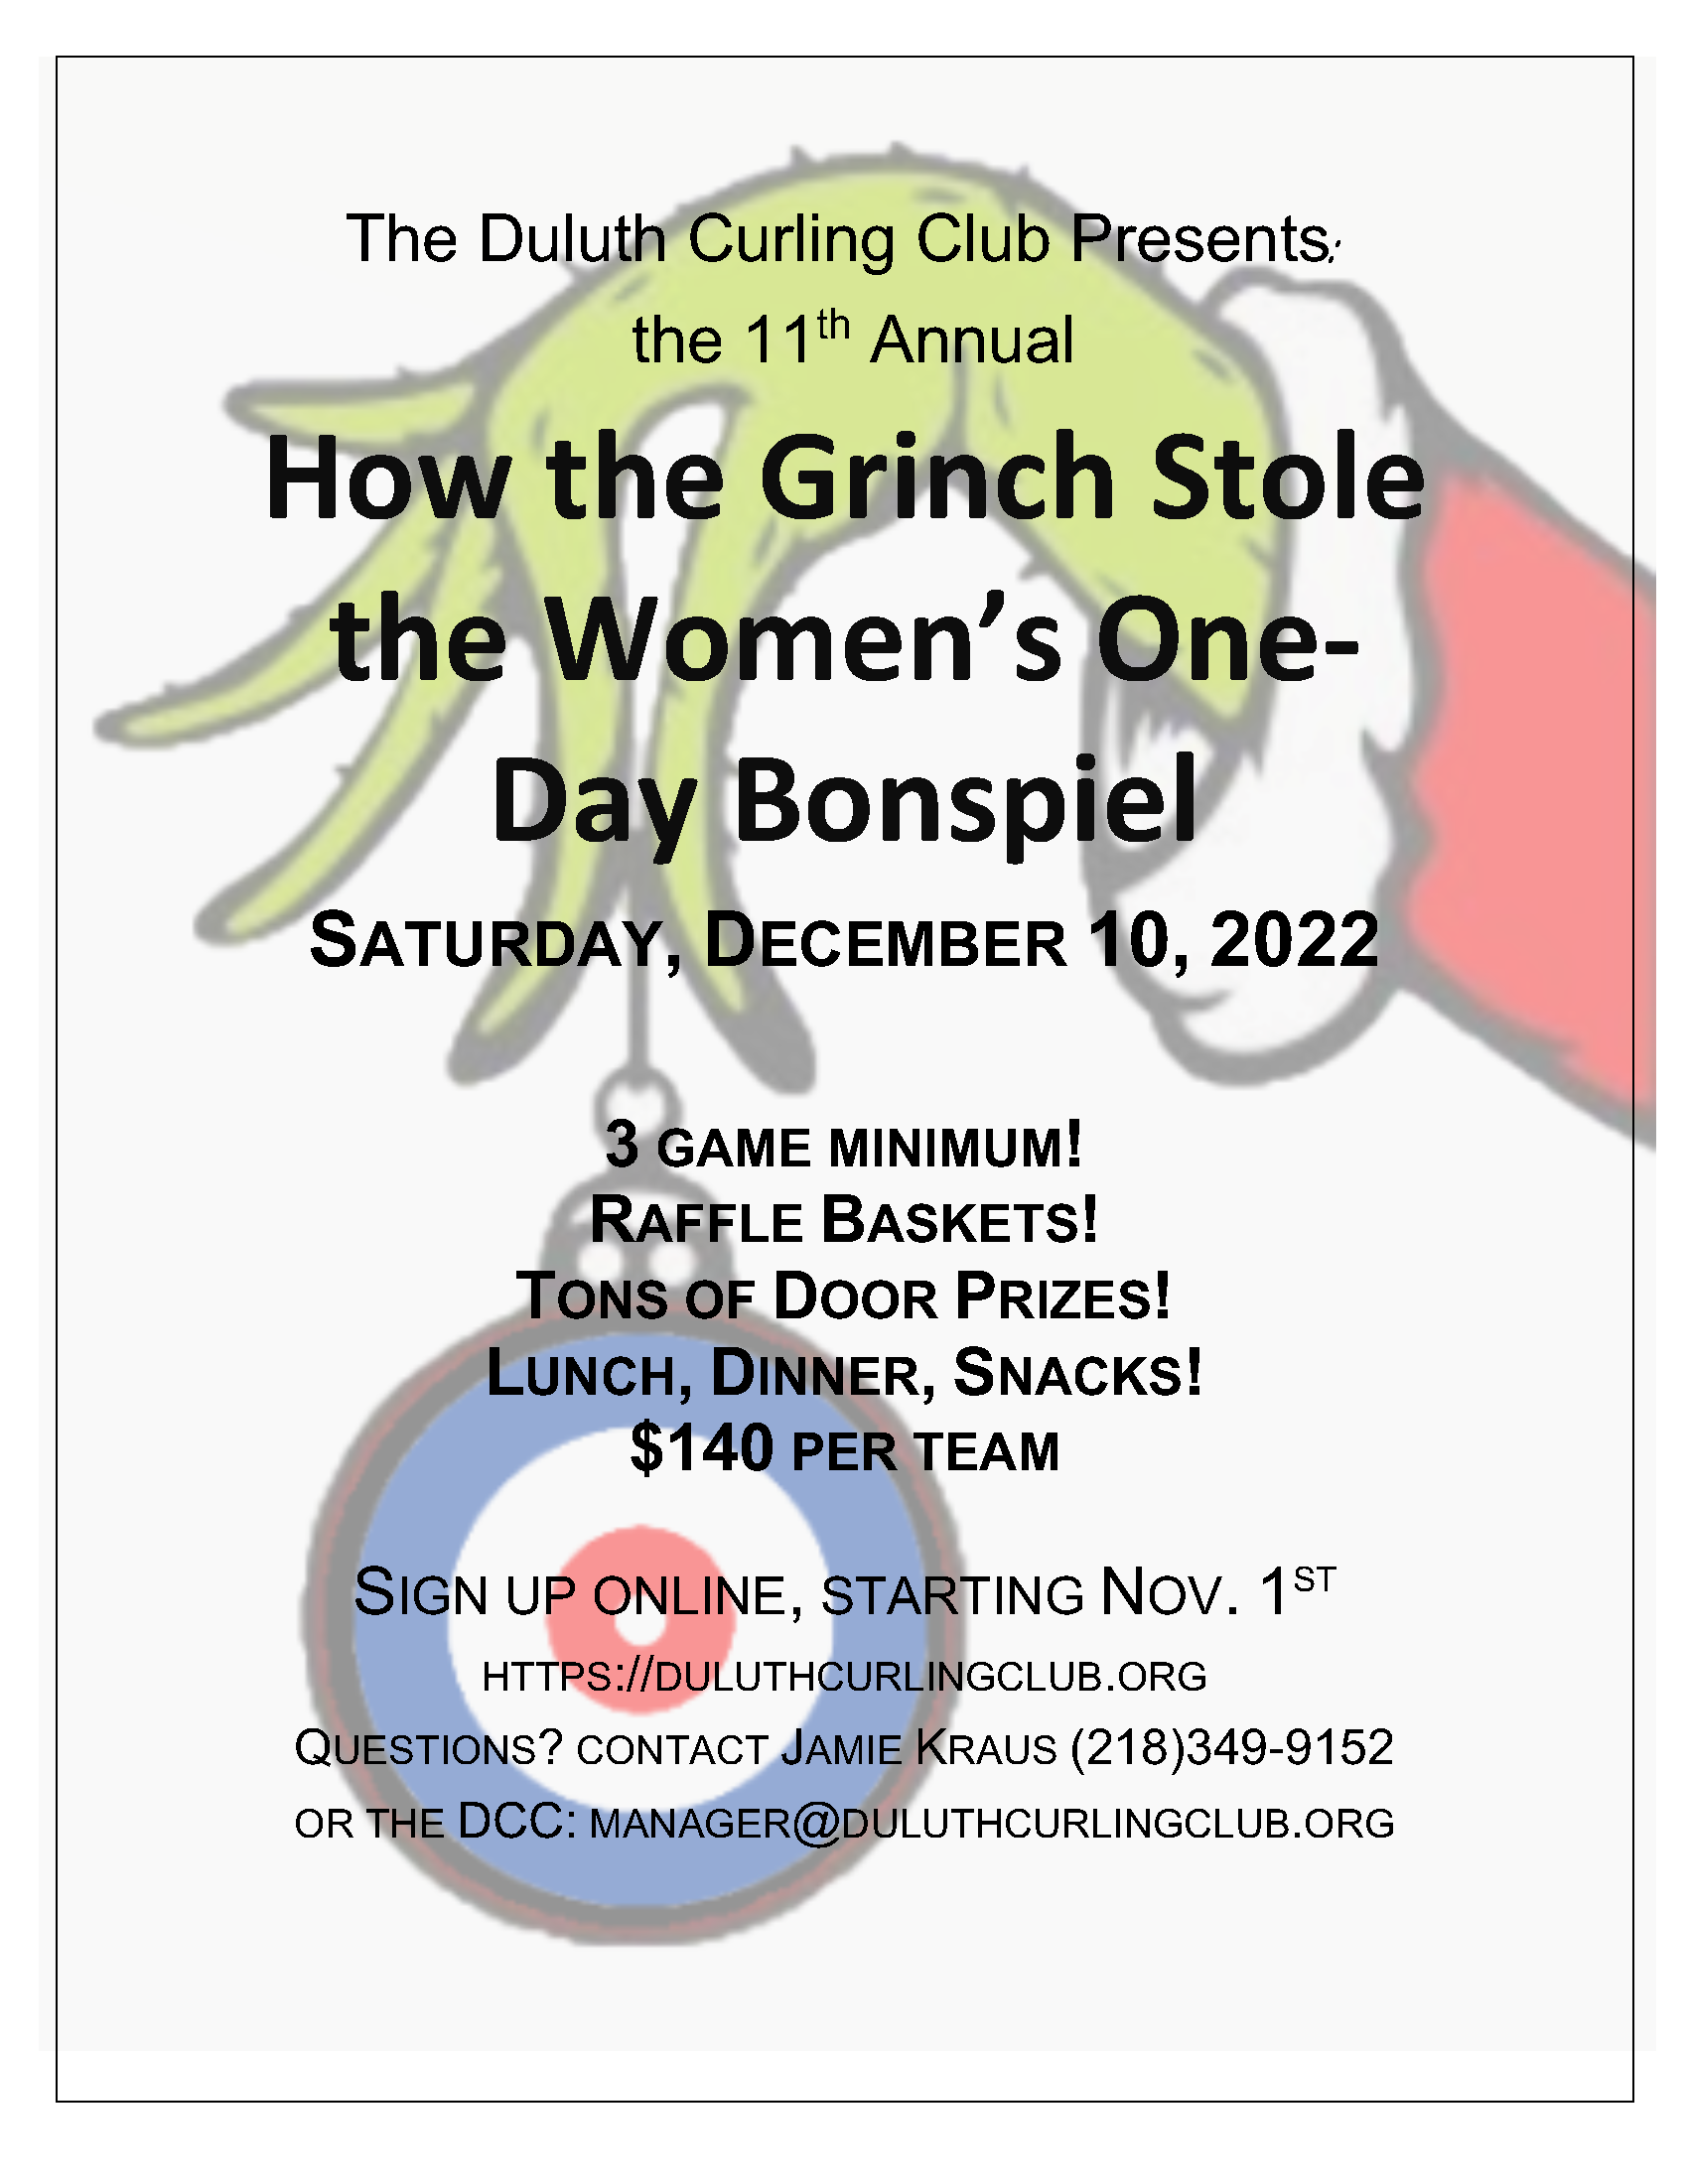 How the Grinch stole the Womens One Day Bonspiel